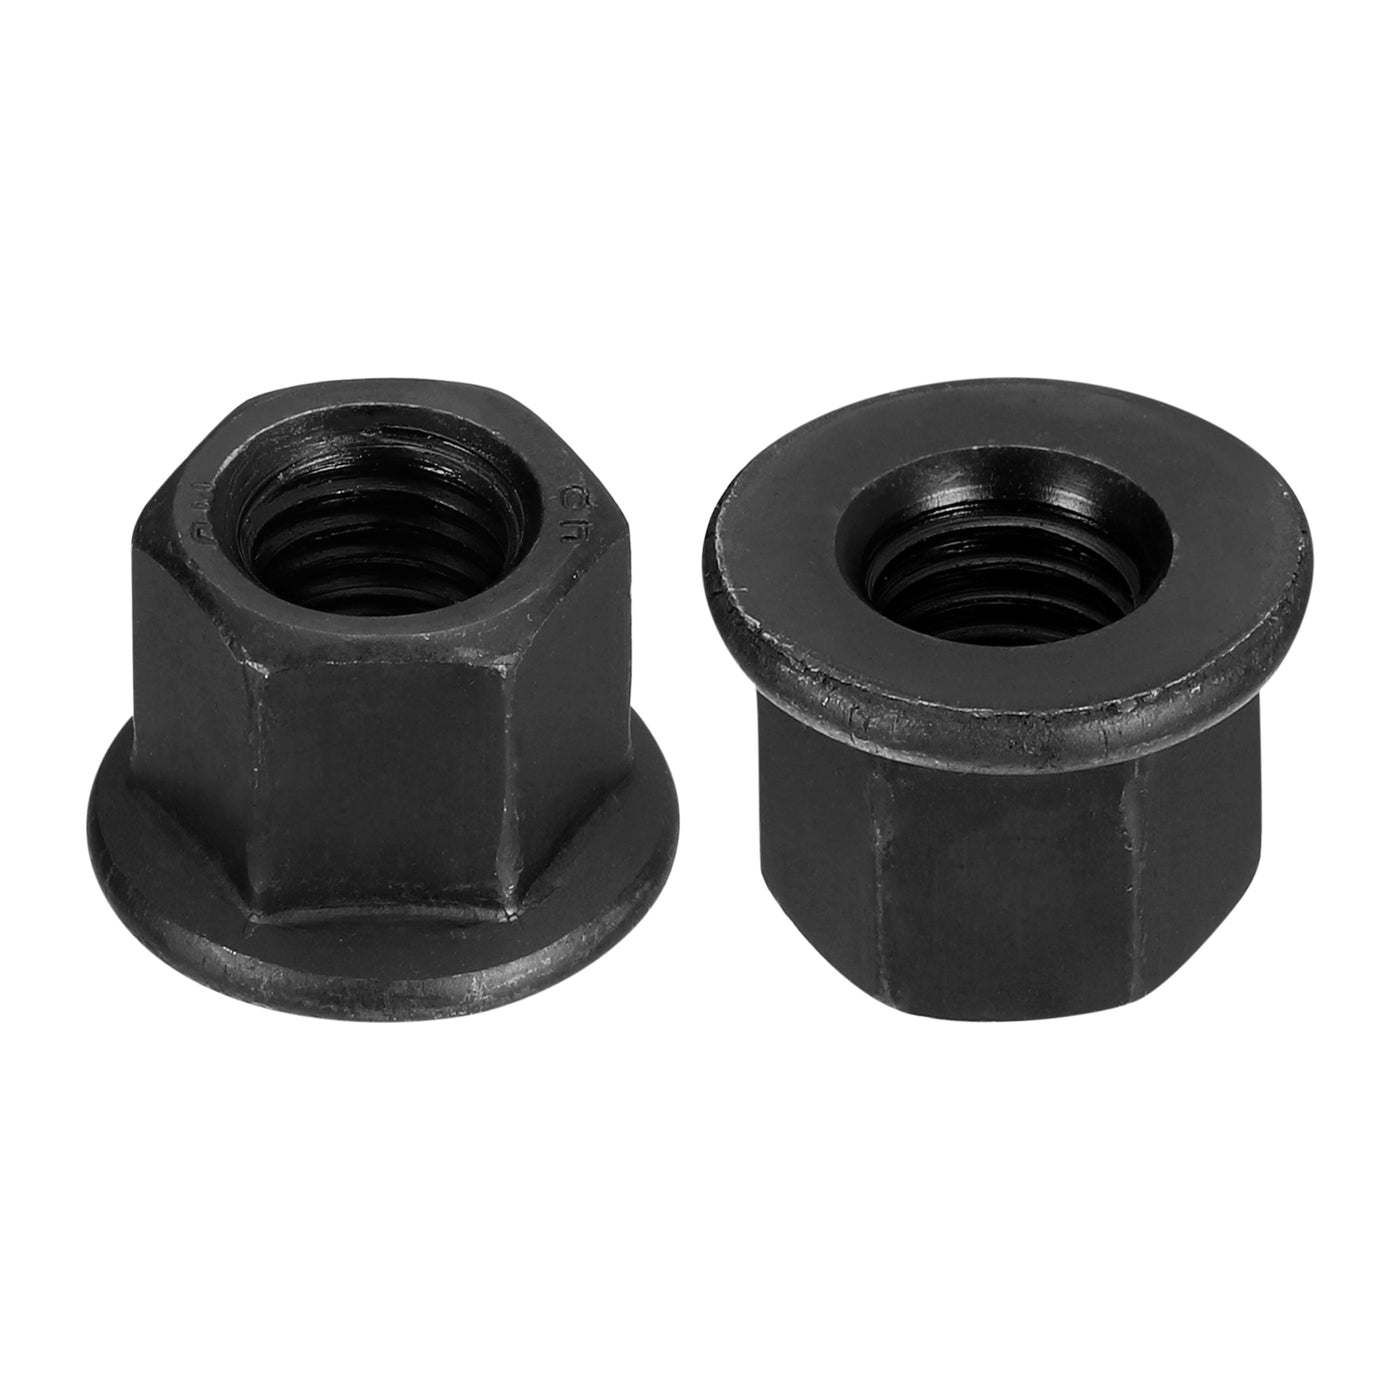 uxcell Uxcell M12 Flange Hex Lock Nuts, 2pcs Grade 12.9 Carbon Steel Hex Flange Nuts